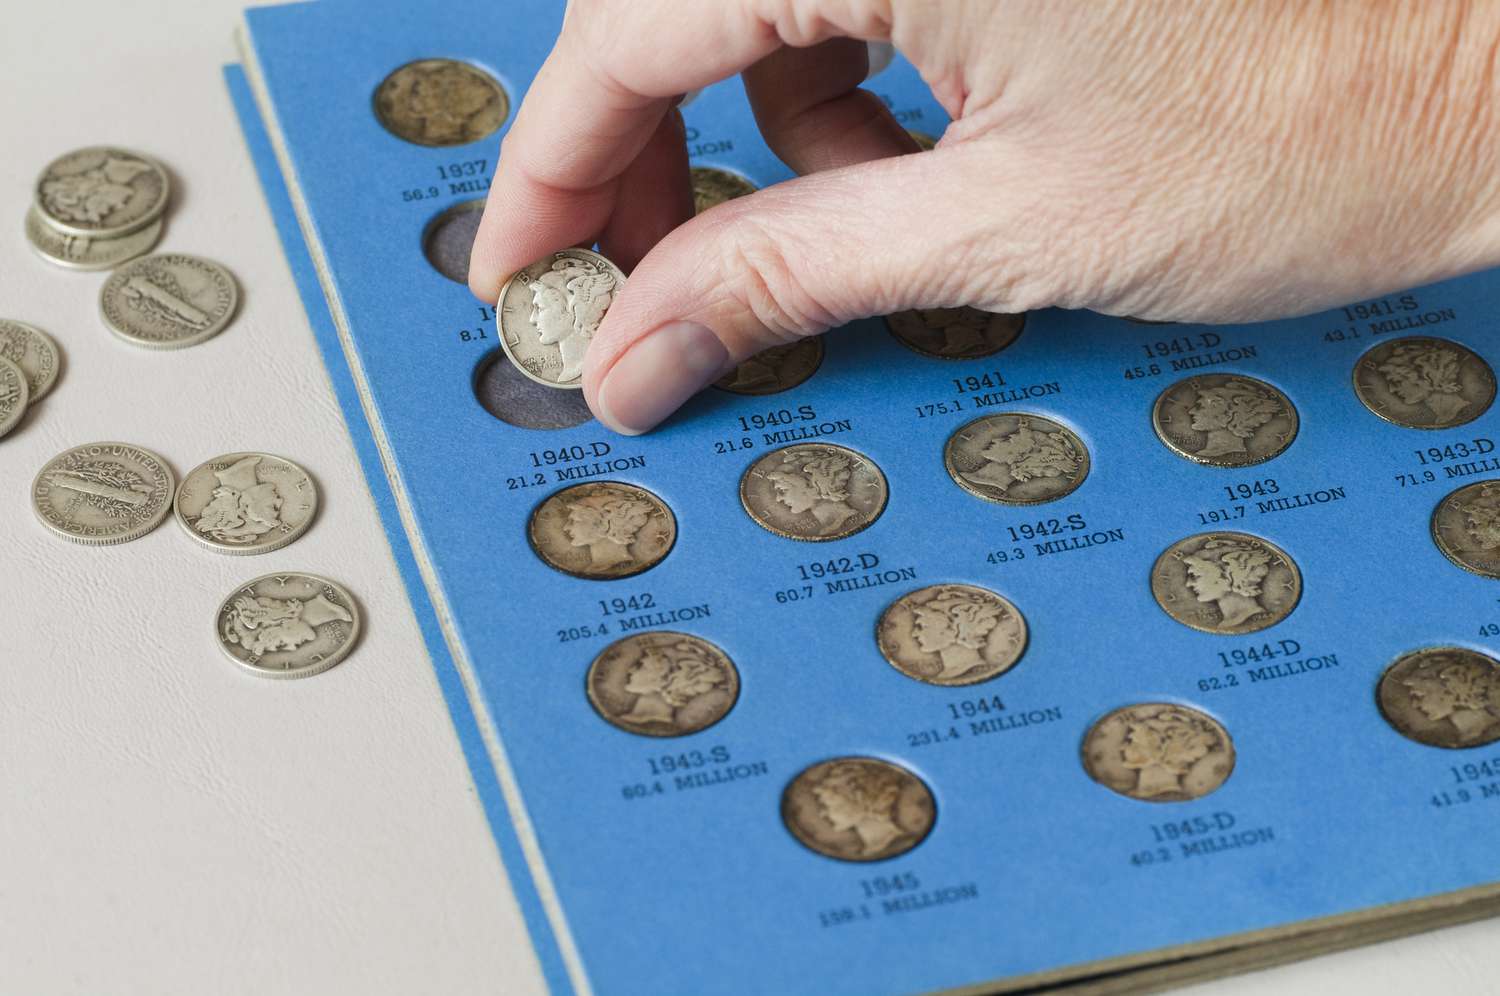 19-astounding-facts-about-numismatics-coin-collecting